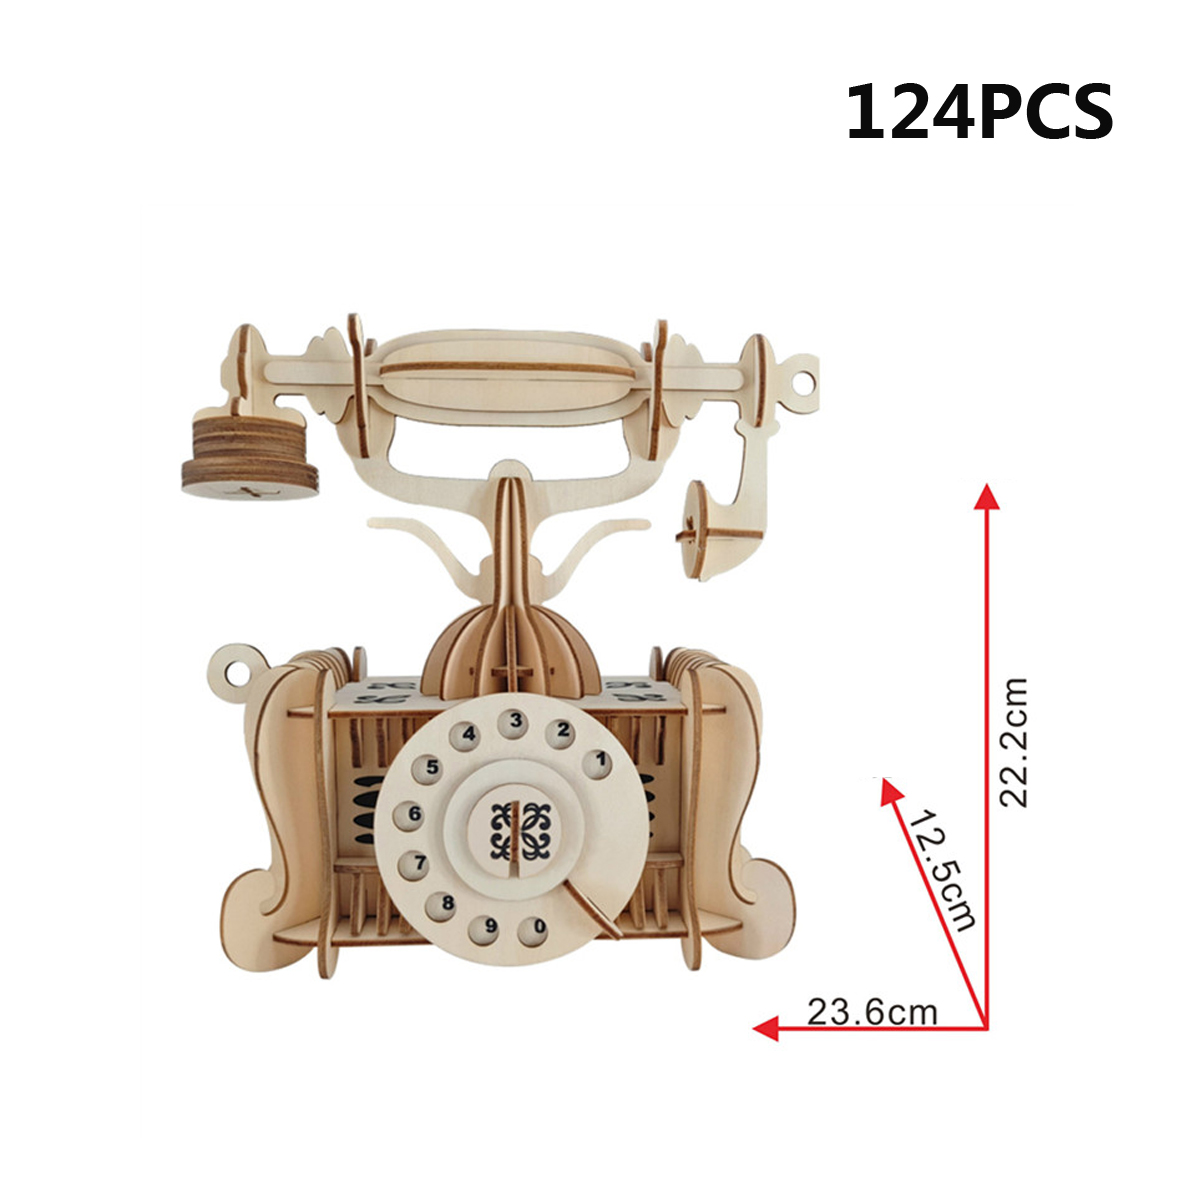 3D Woodcraft Assembly Retro-electric Appliance Series Kit Jigsaw Puzzle Decoration Toy Model for Kids Gift